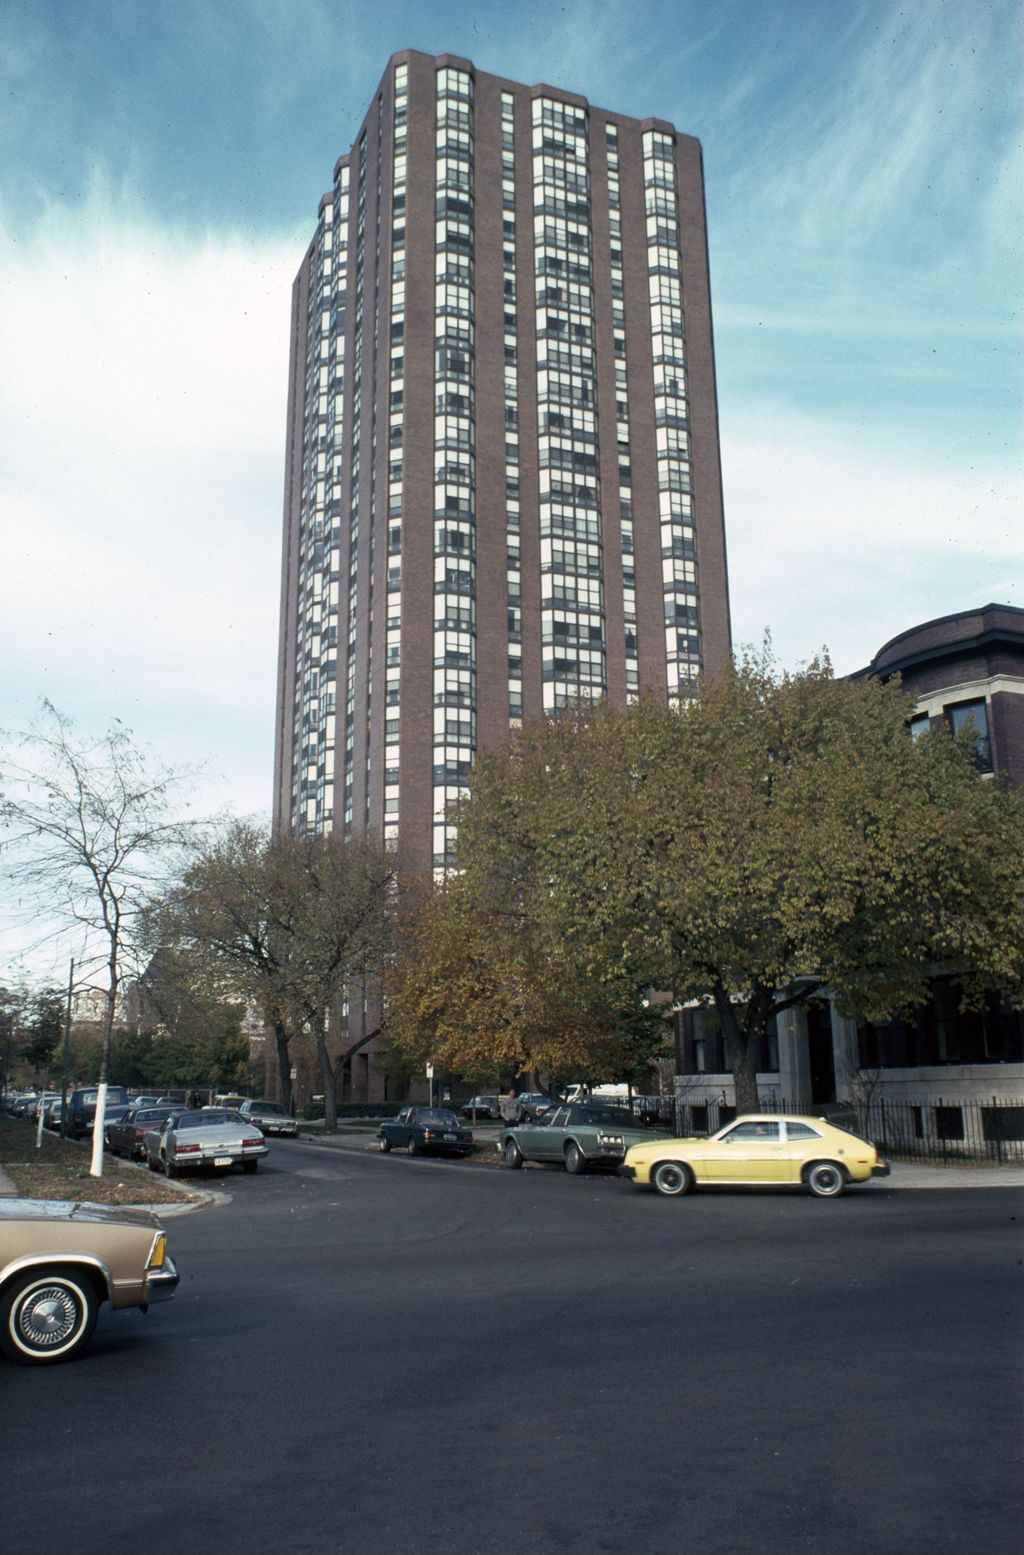 Miniature of Kenmore Plaza Apartments, 5225 North Kenmore Avenue